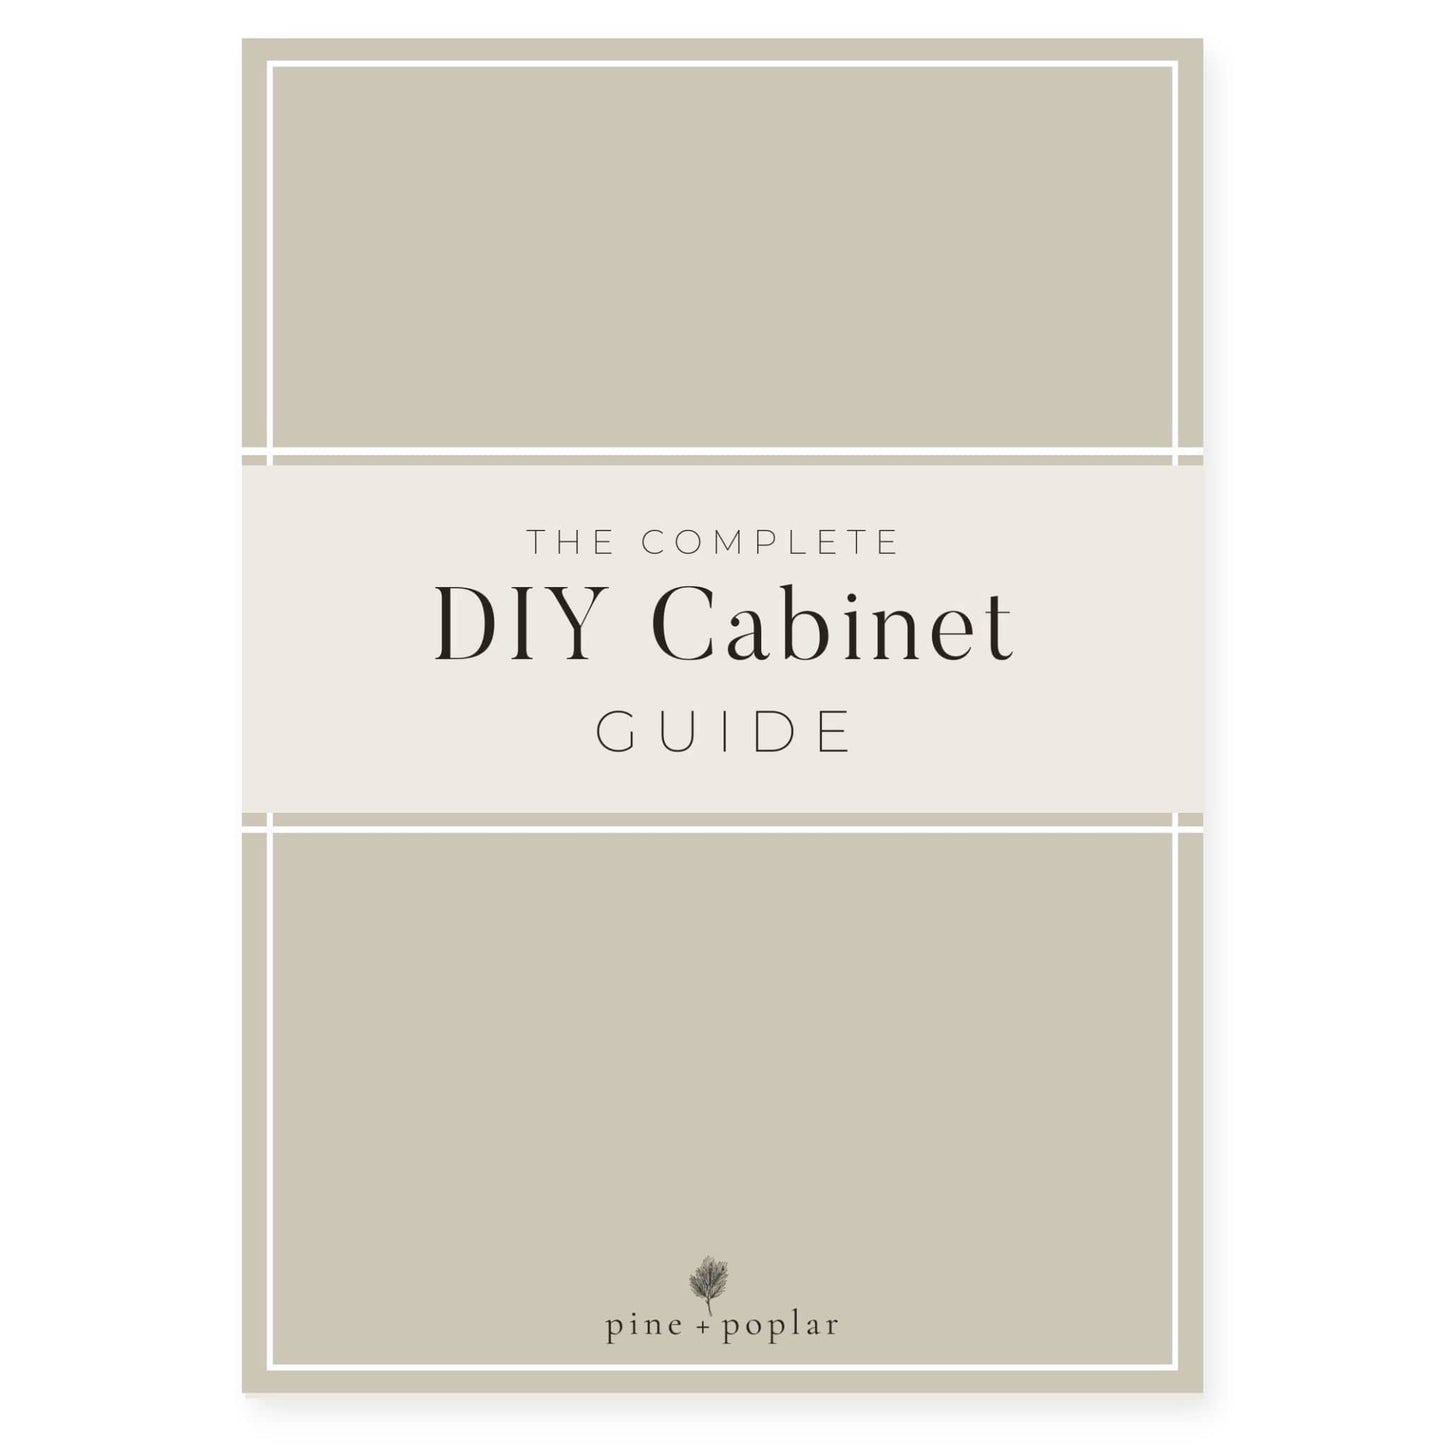 The DIY Cabinet Guide